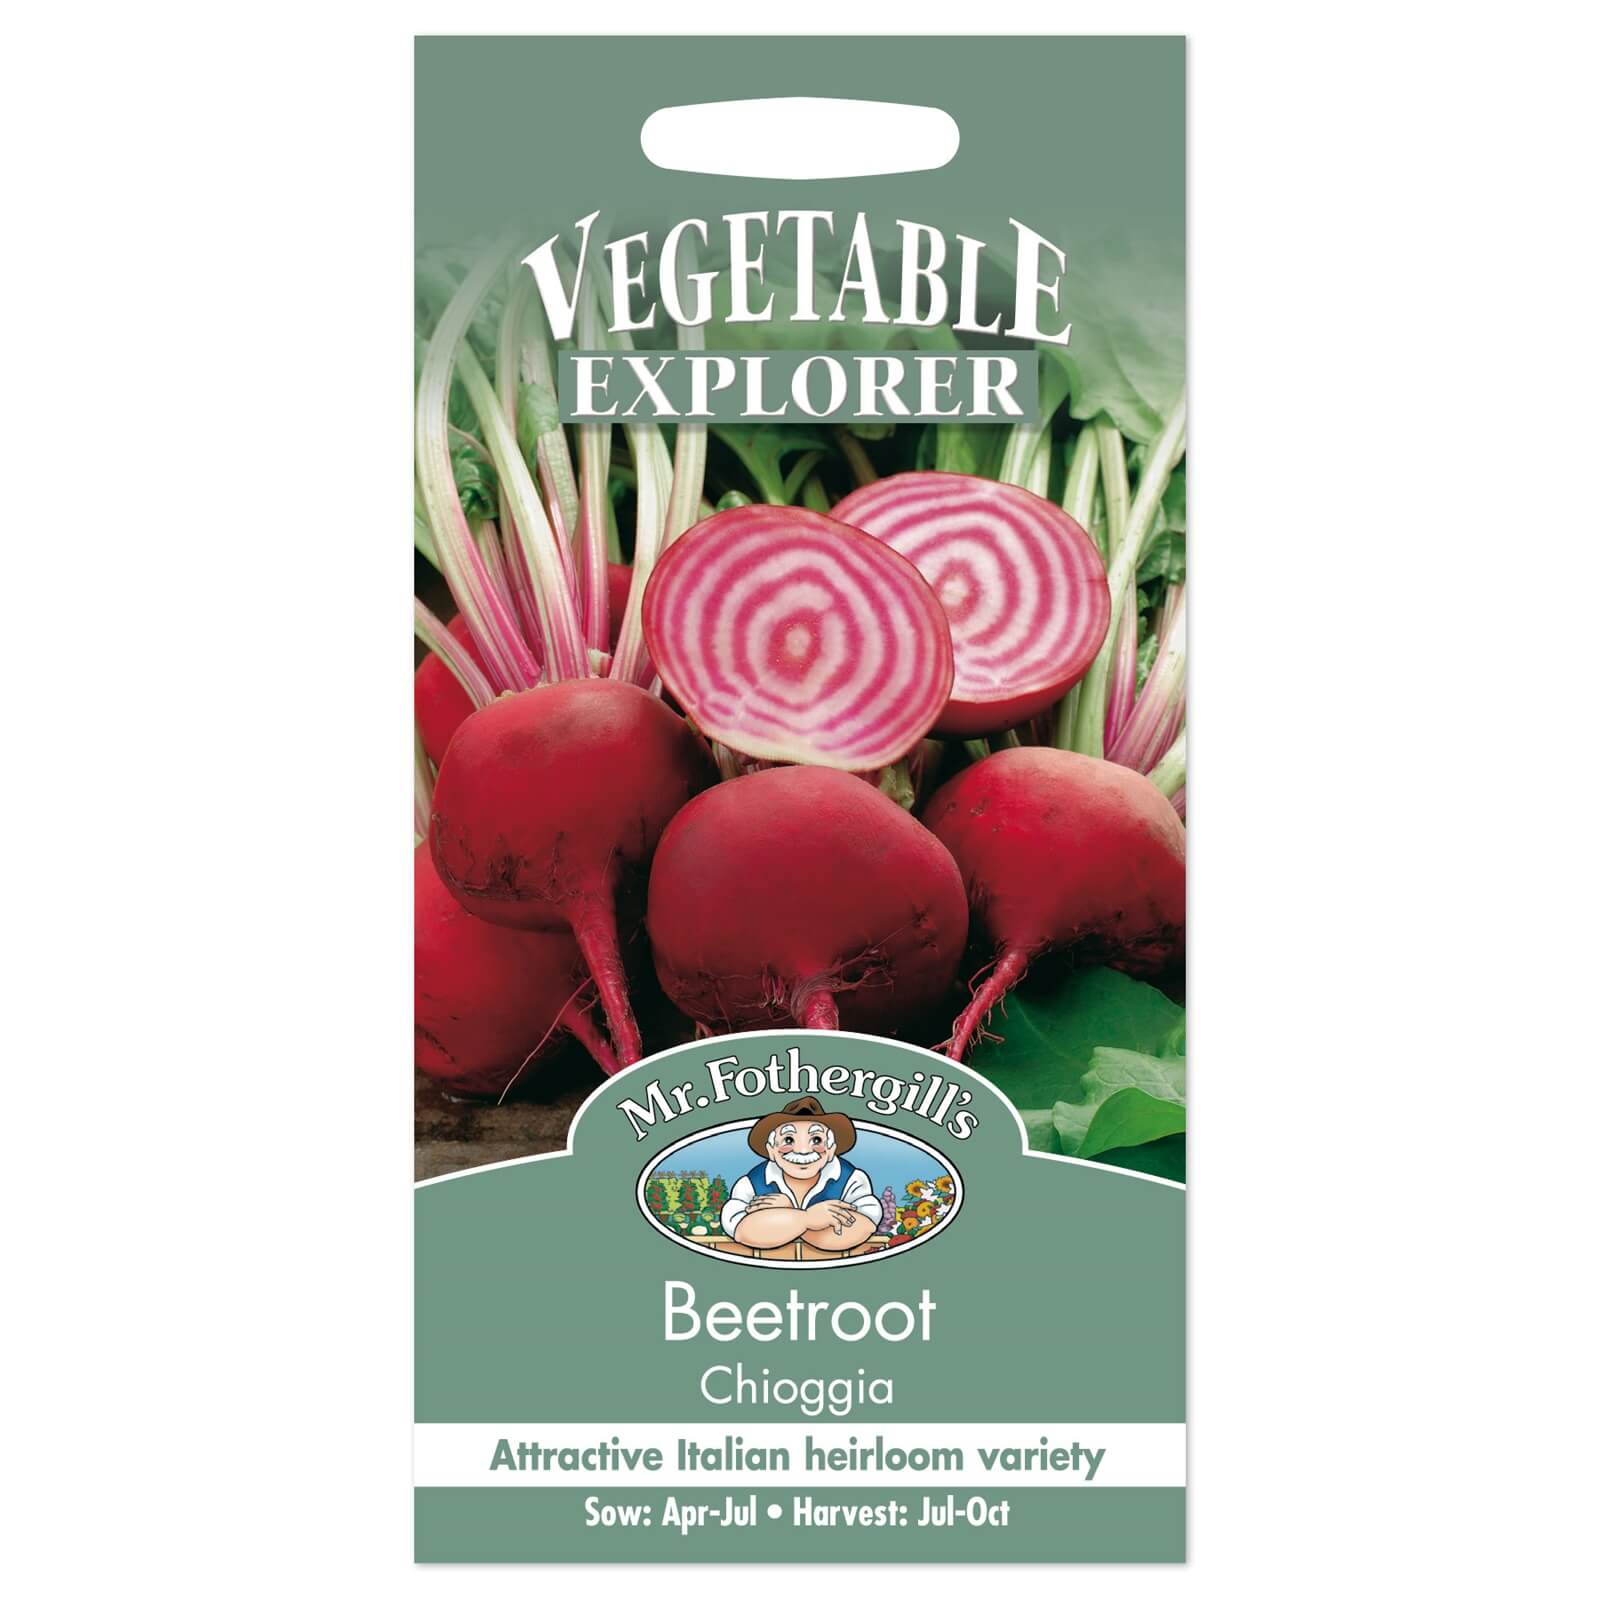 Mr. Fothergill's Beetroot Chioggia Seeds